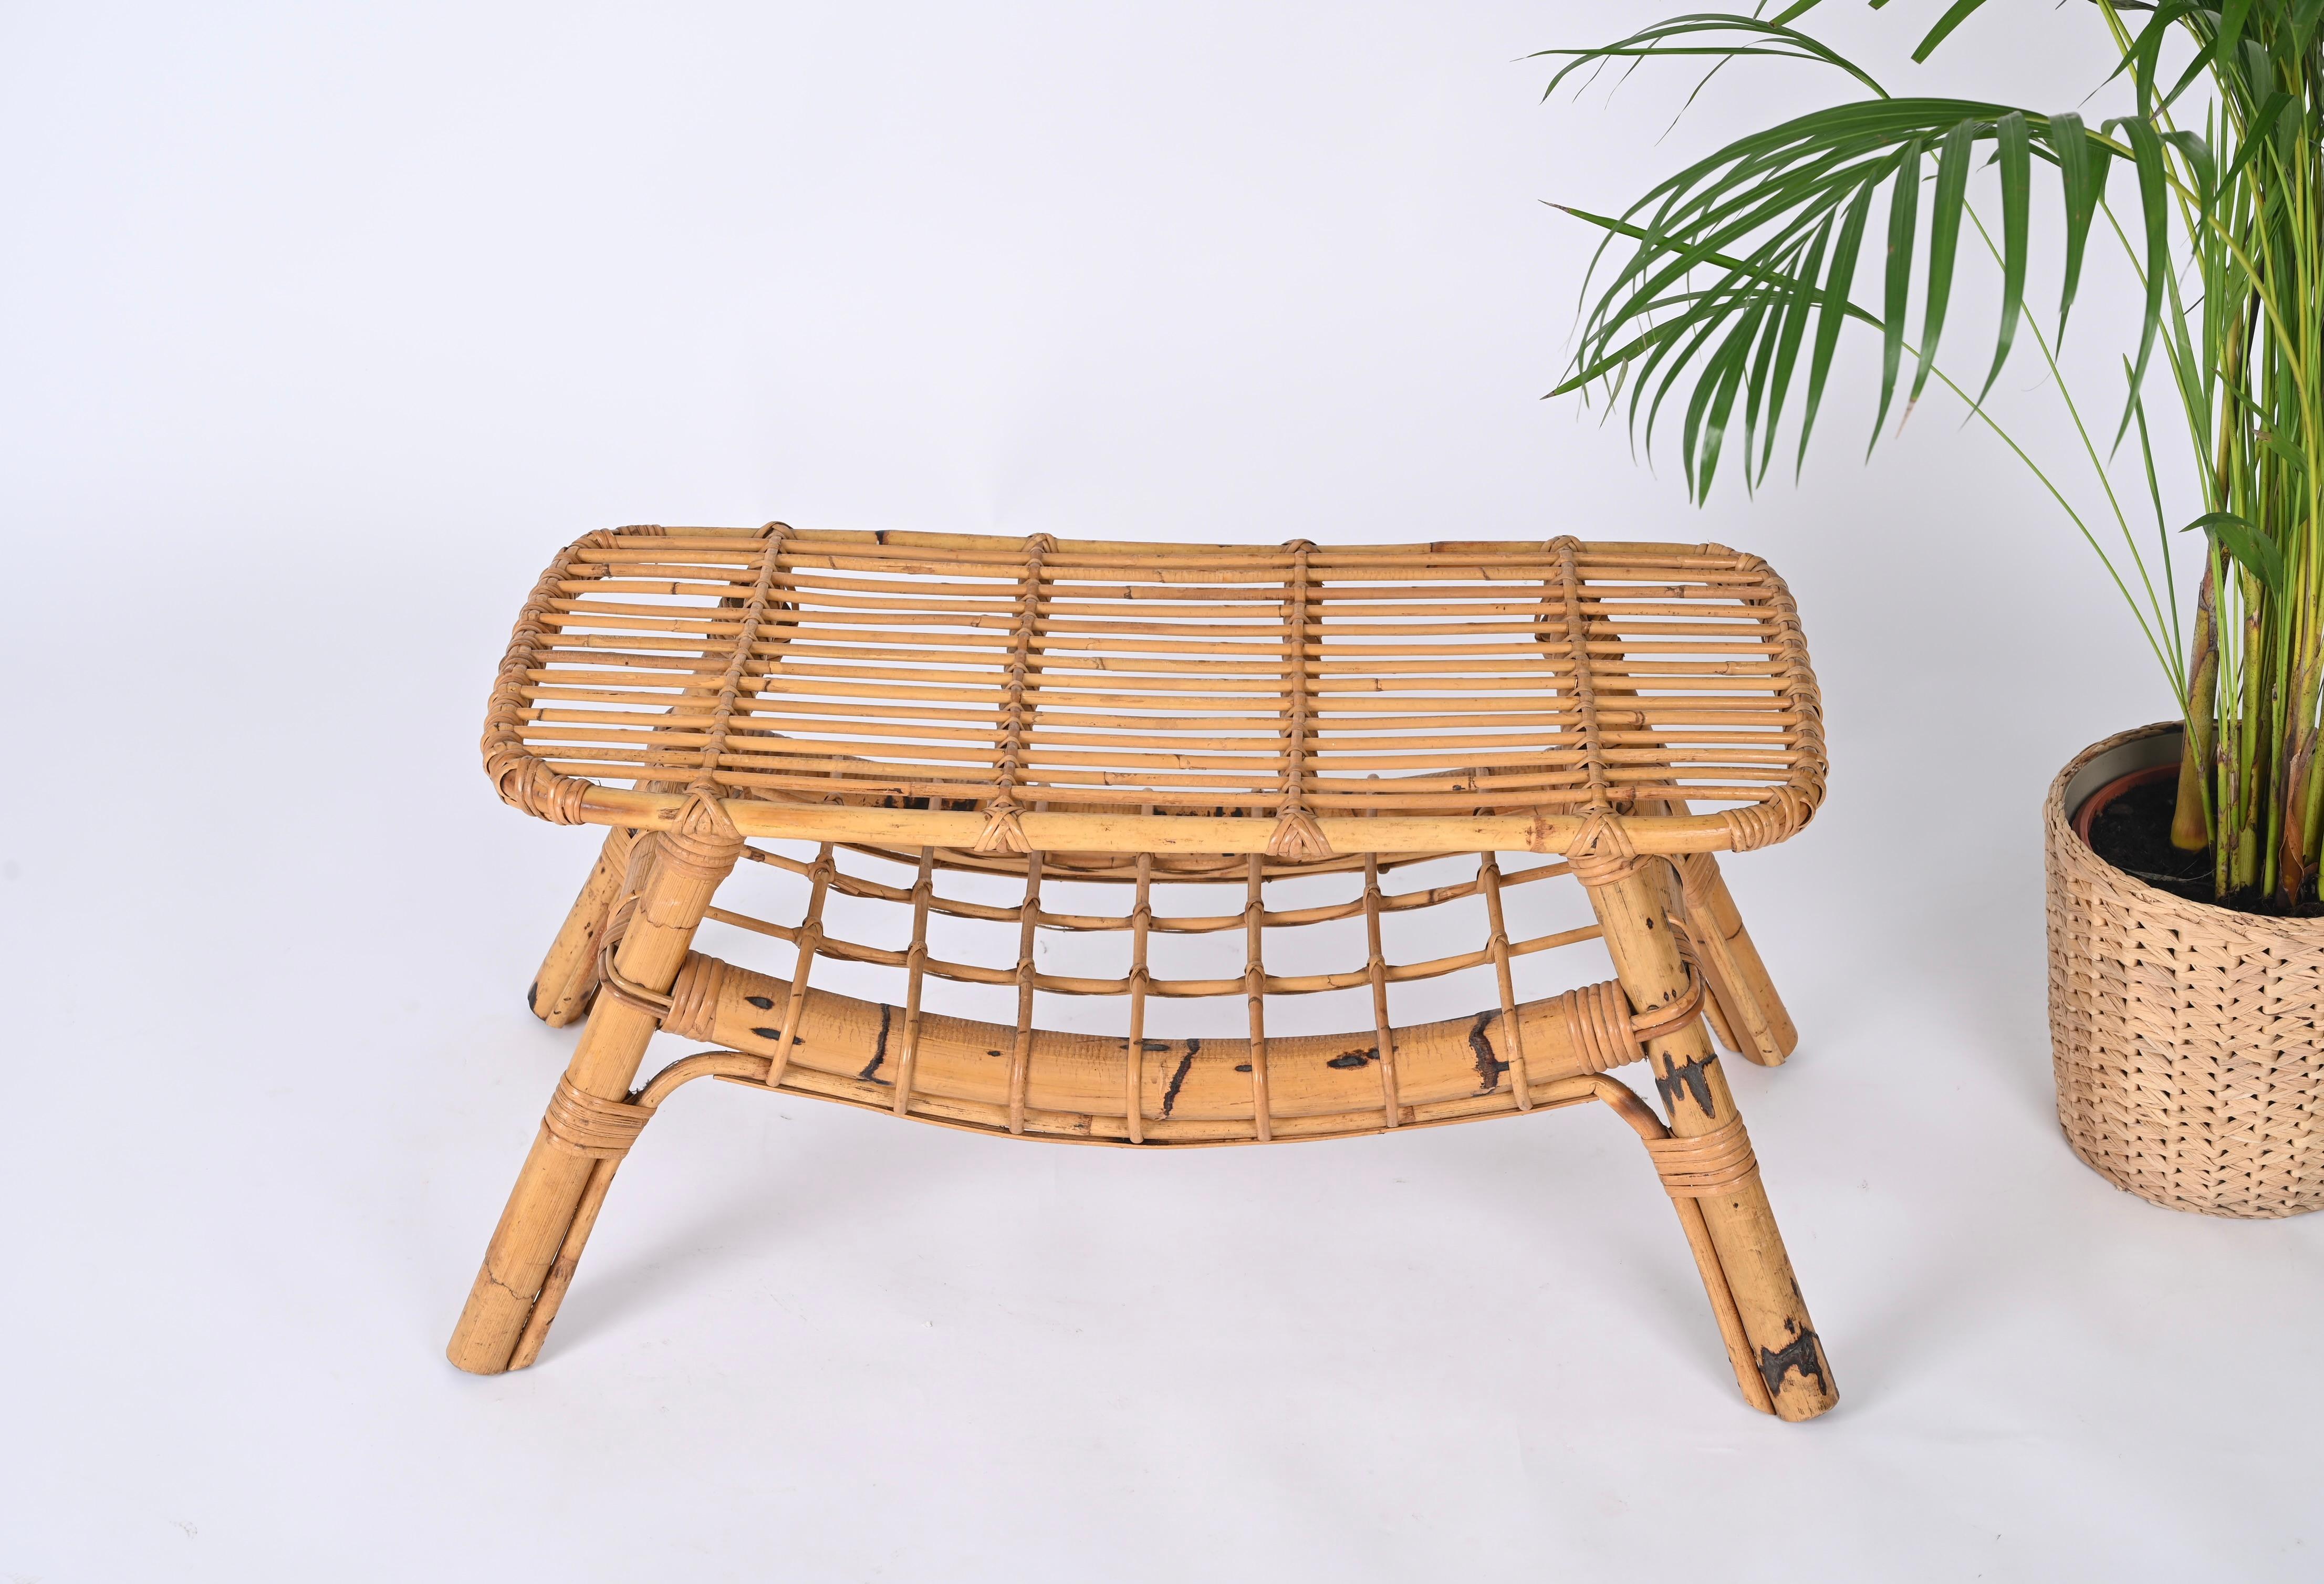 Fantastic midcentury Italian coffee table in bamboo and rattan. This gorgeous piece was designed in Italy during the 1960s and is attributed to Tito Agnoli. 

This coffee table of exceptional craftsmanship features a sturdy structure in curved